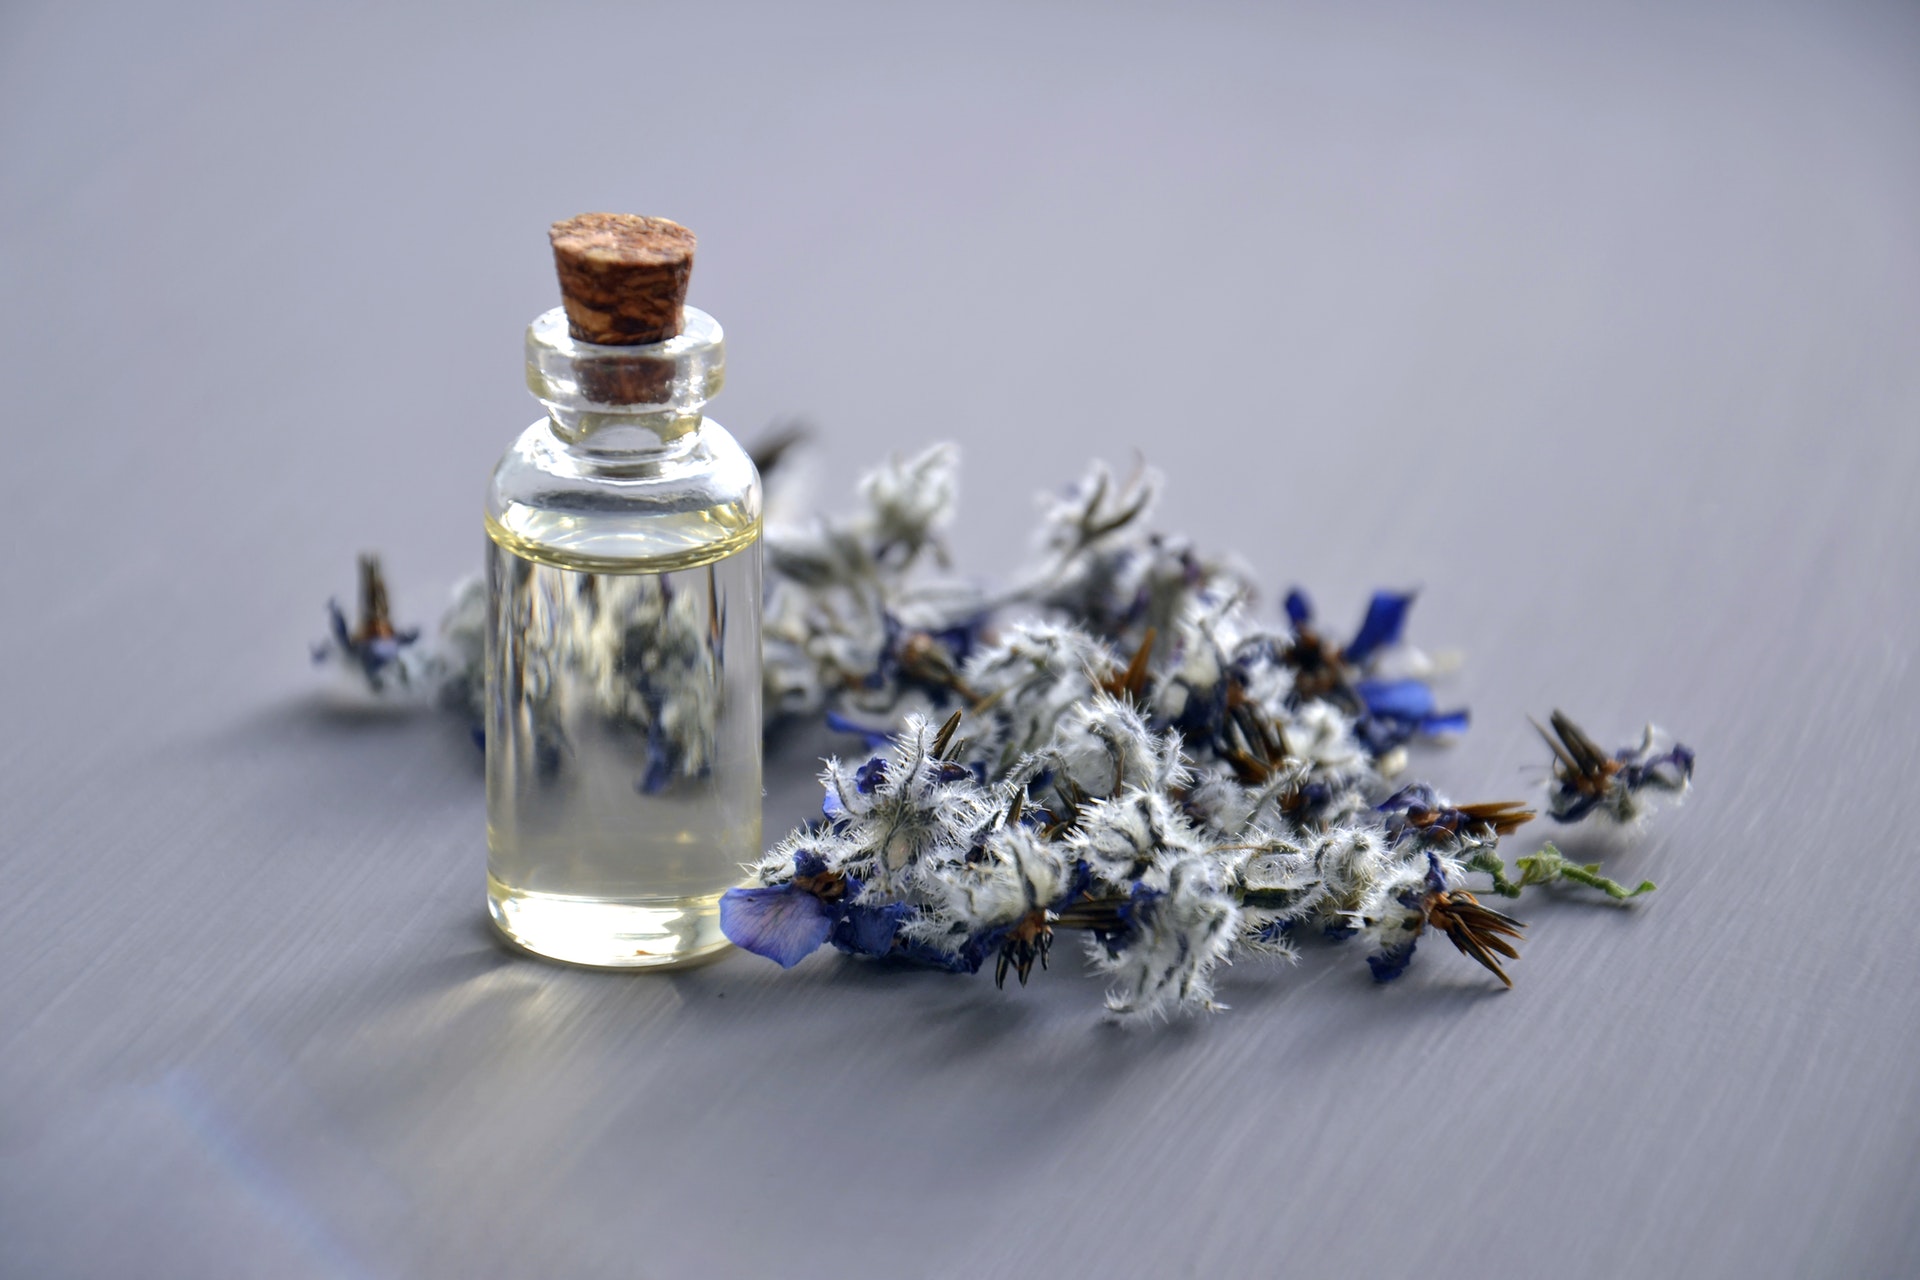 Aromatherapy for Health and Wellness: 12 Essential Oils to Use